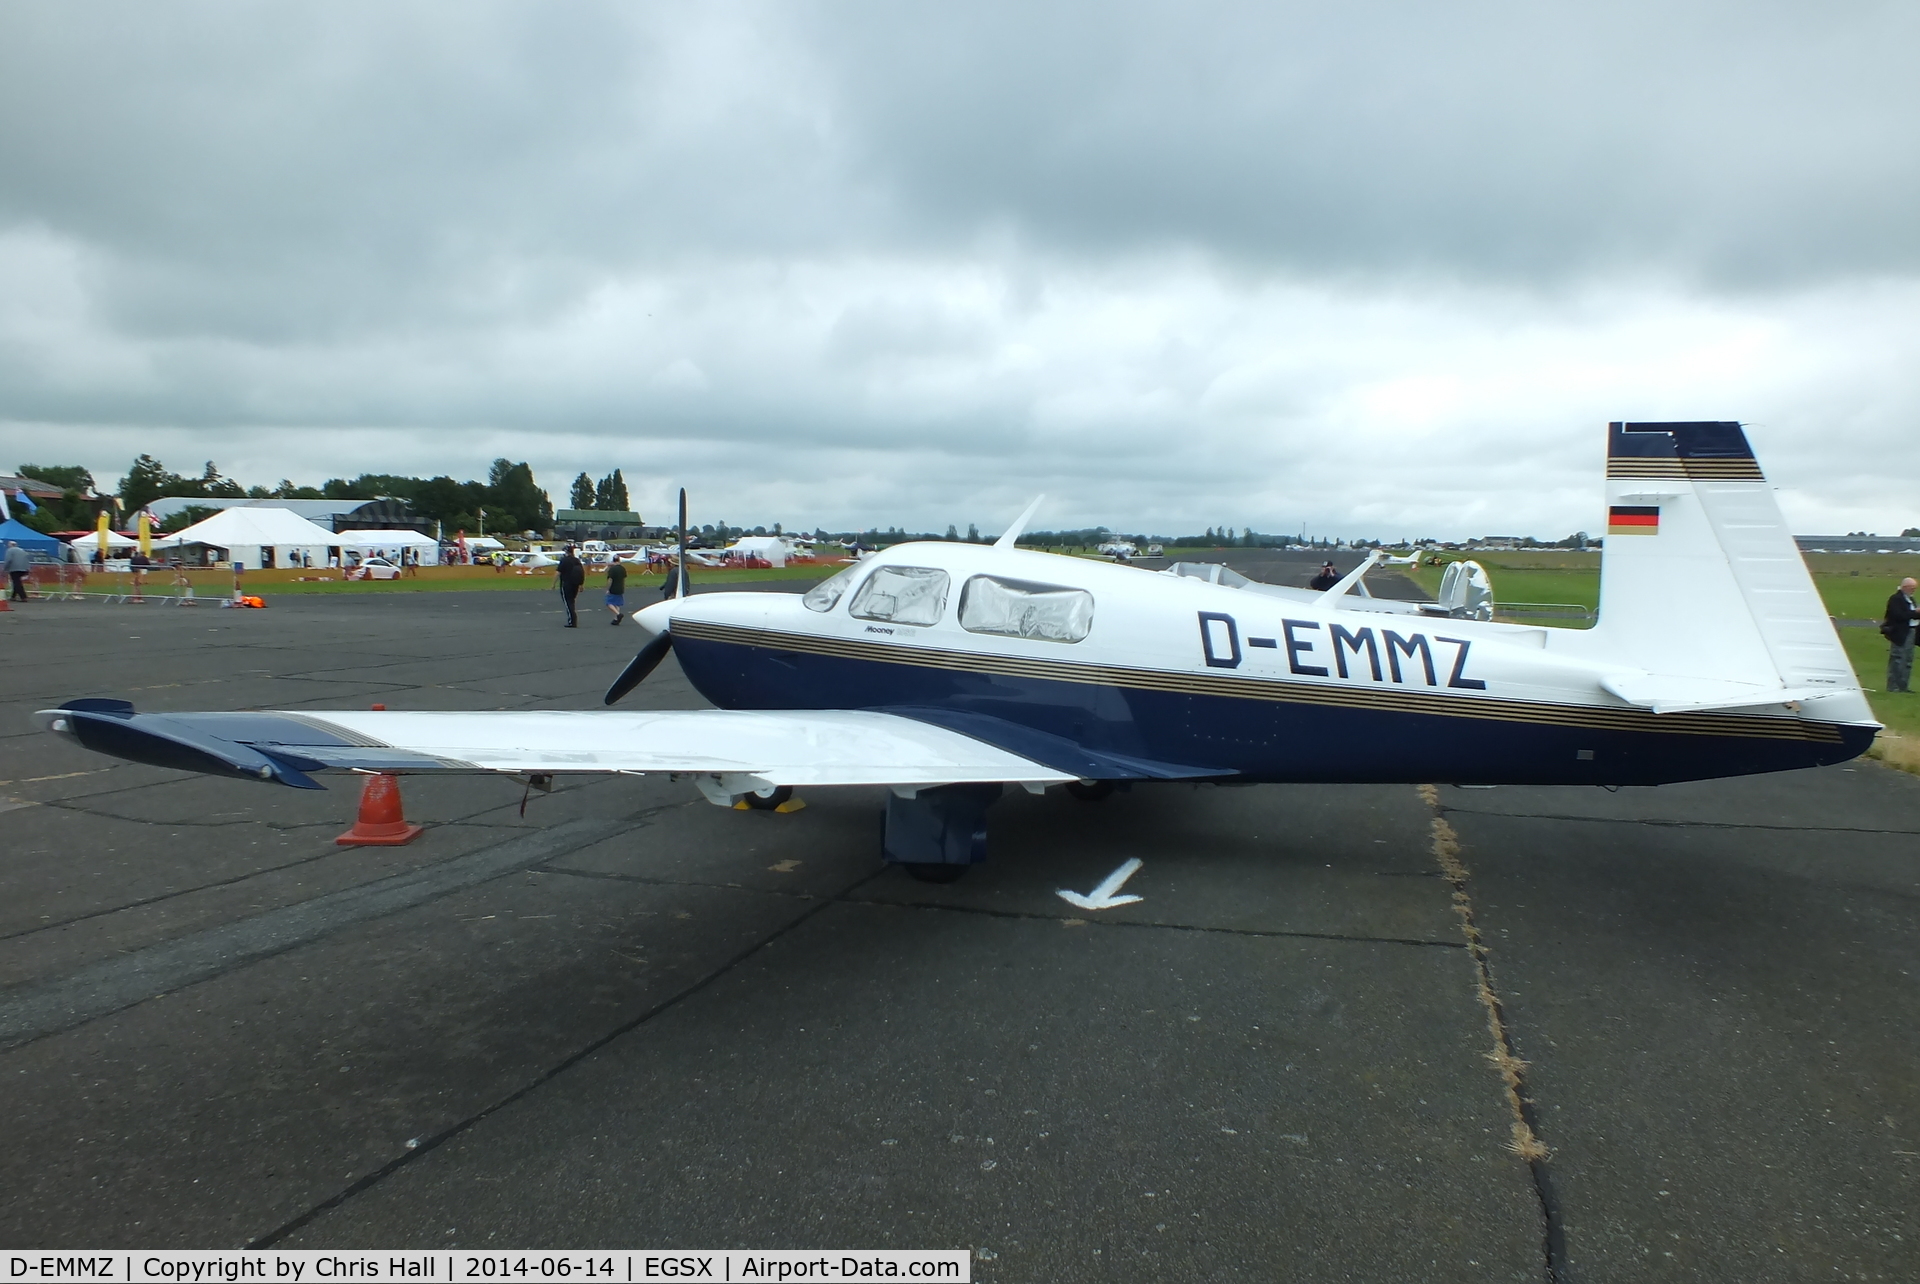 D-EMMZ, Mooney M.20J 205 C/N 24-3367, at the Air Britain fly in